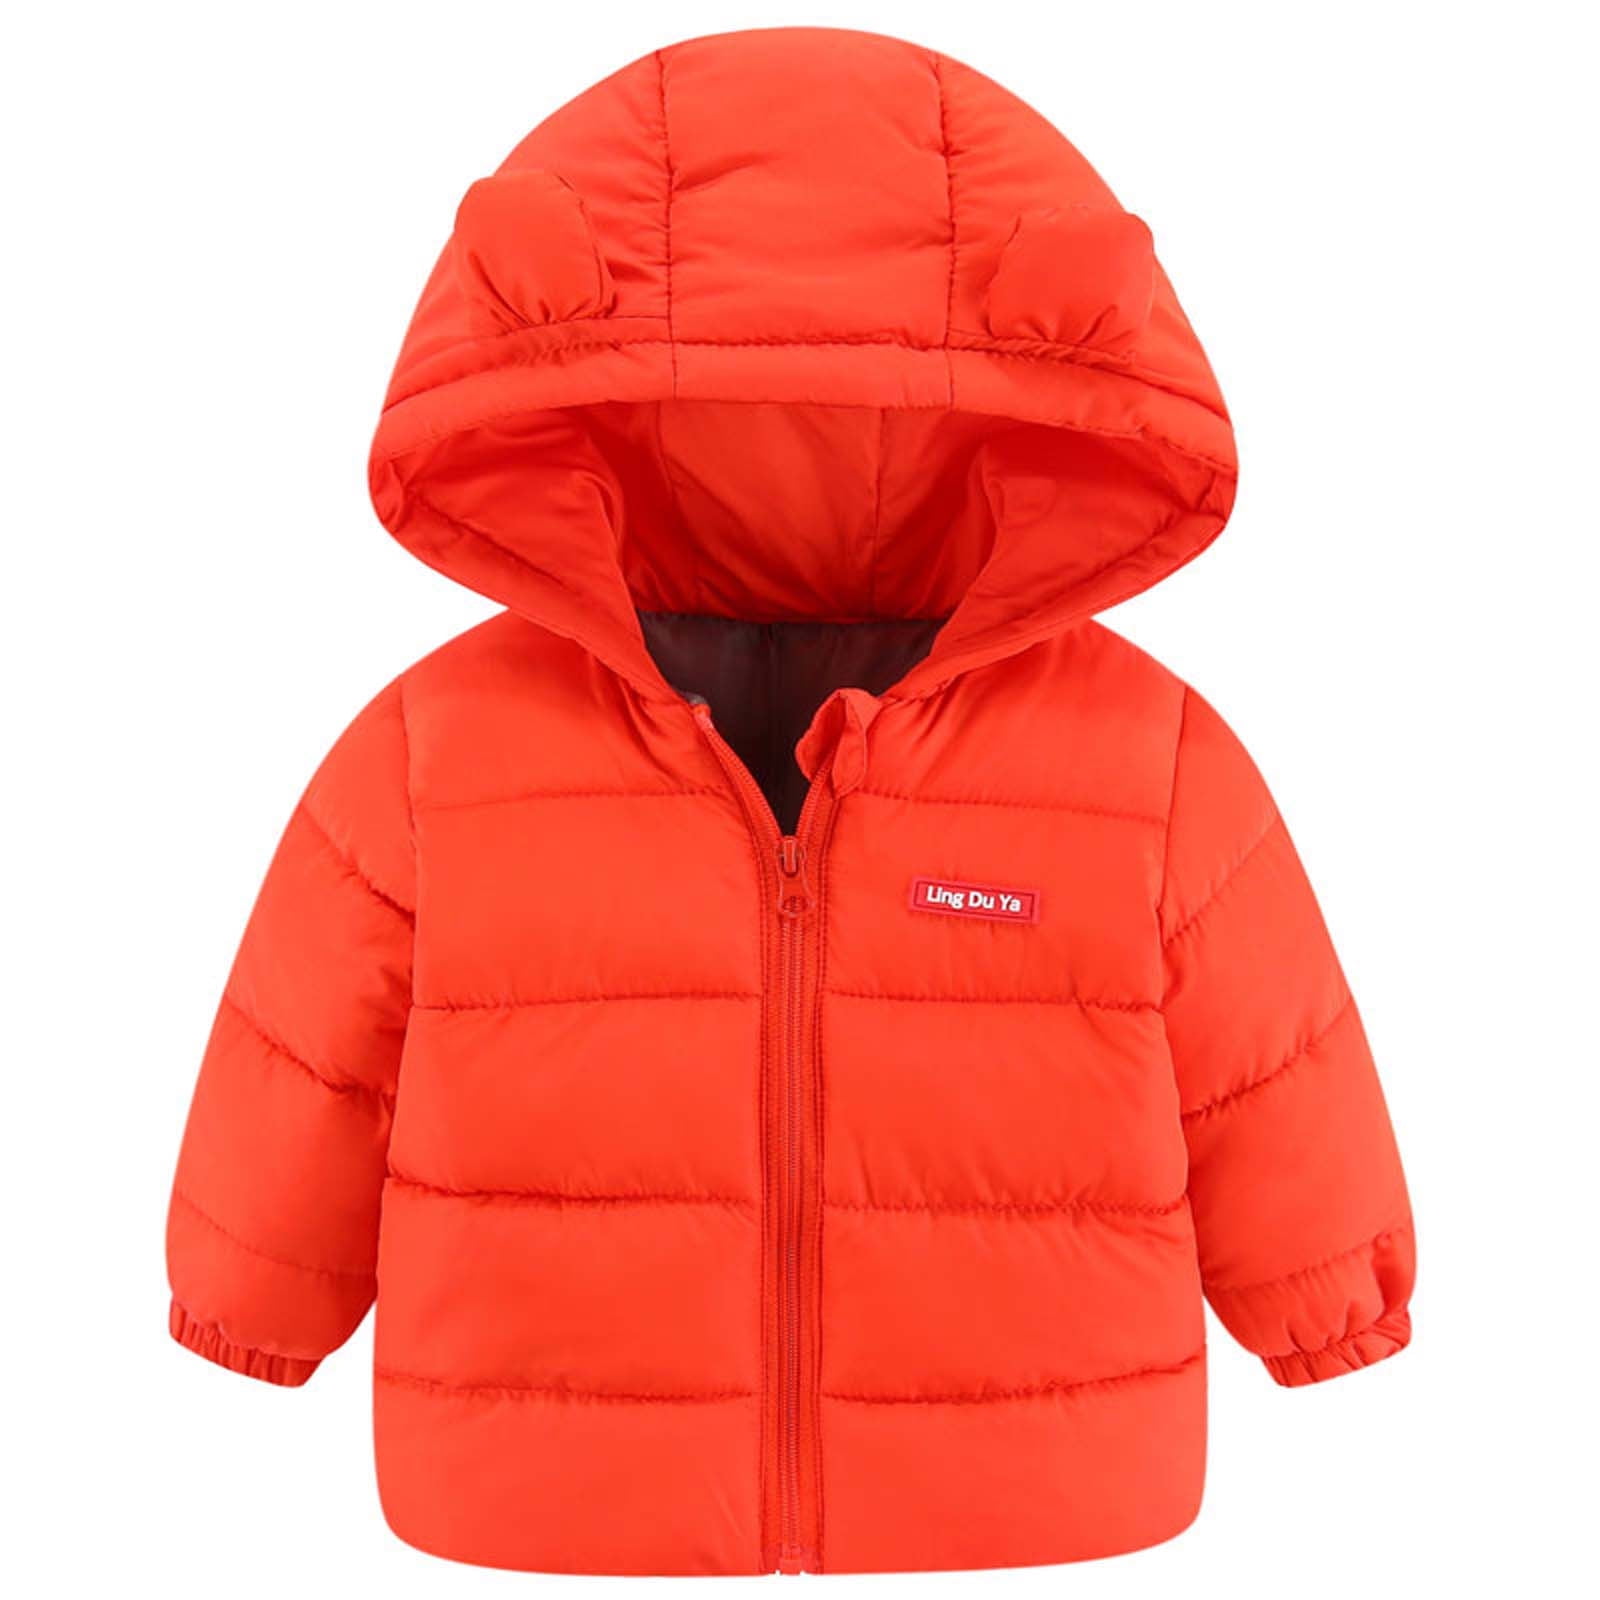 TMOYZQ Baby Days savings!Toddler Girls Boys Snow Down Hooded Jacket Fall  Winter Warm Hoodie Thick Puffer Coat Kids Outwear Clothes 2-8 Years On